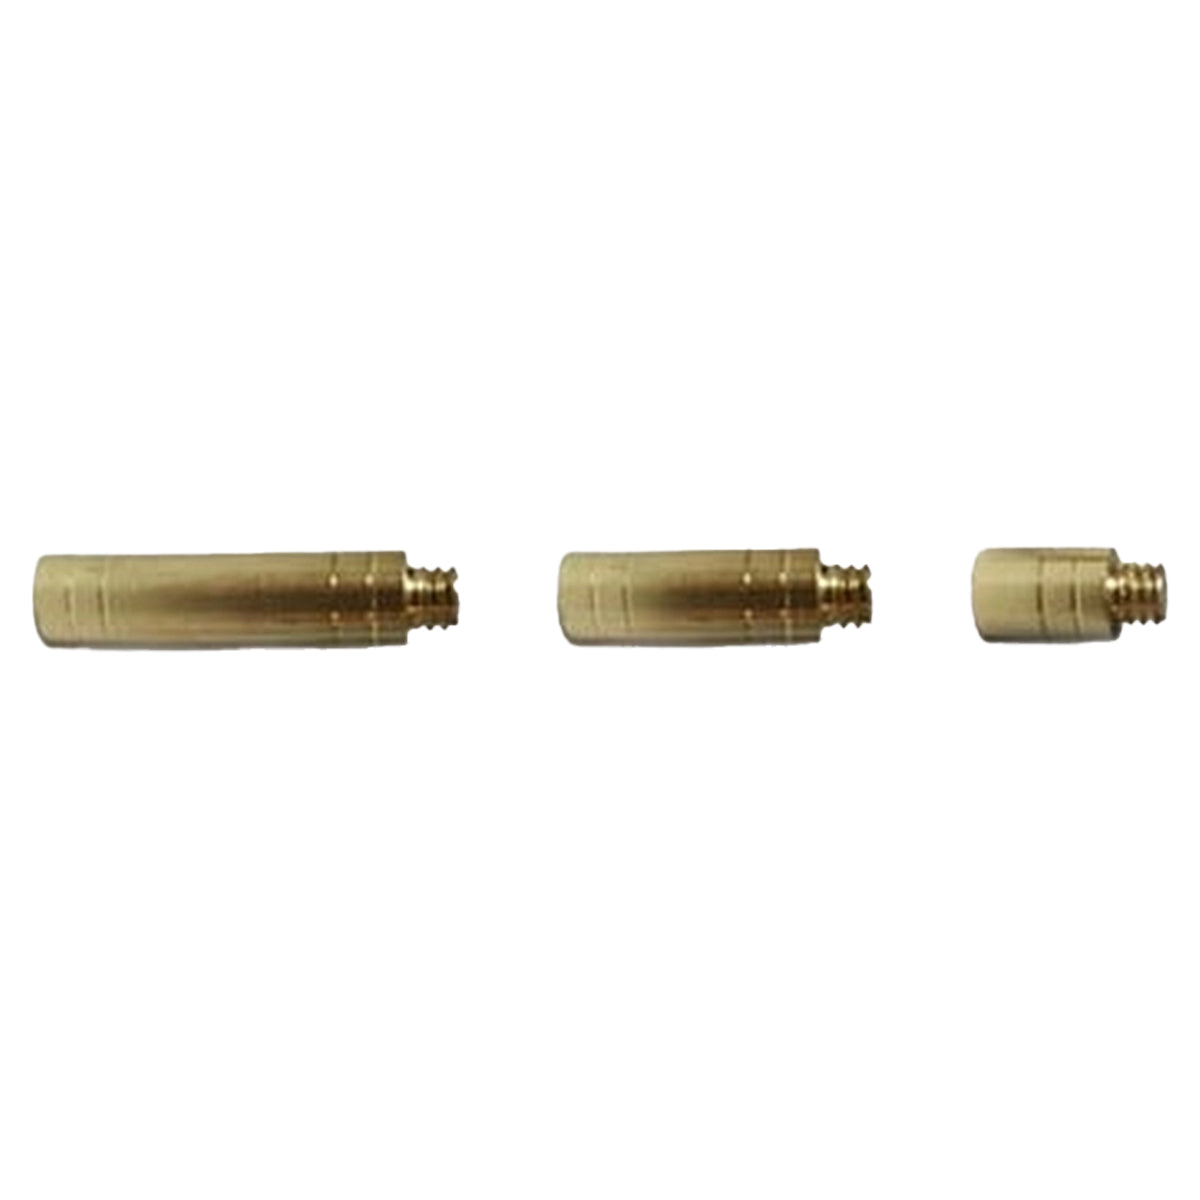 Black Eagle F.O.C.O.S. Brass Weights - 12 count